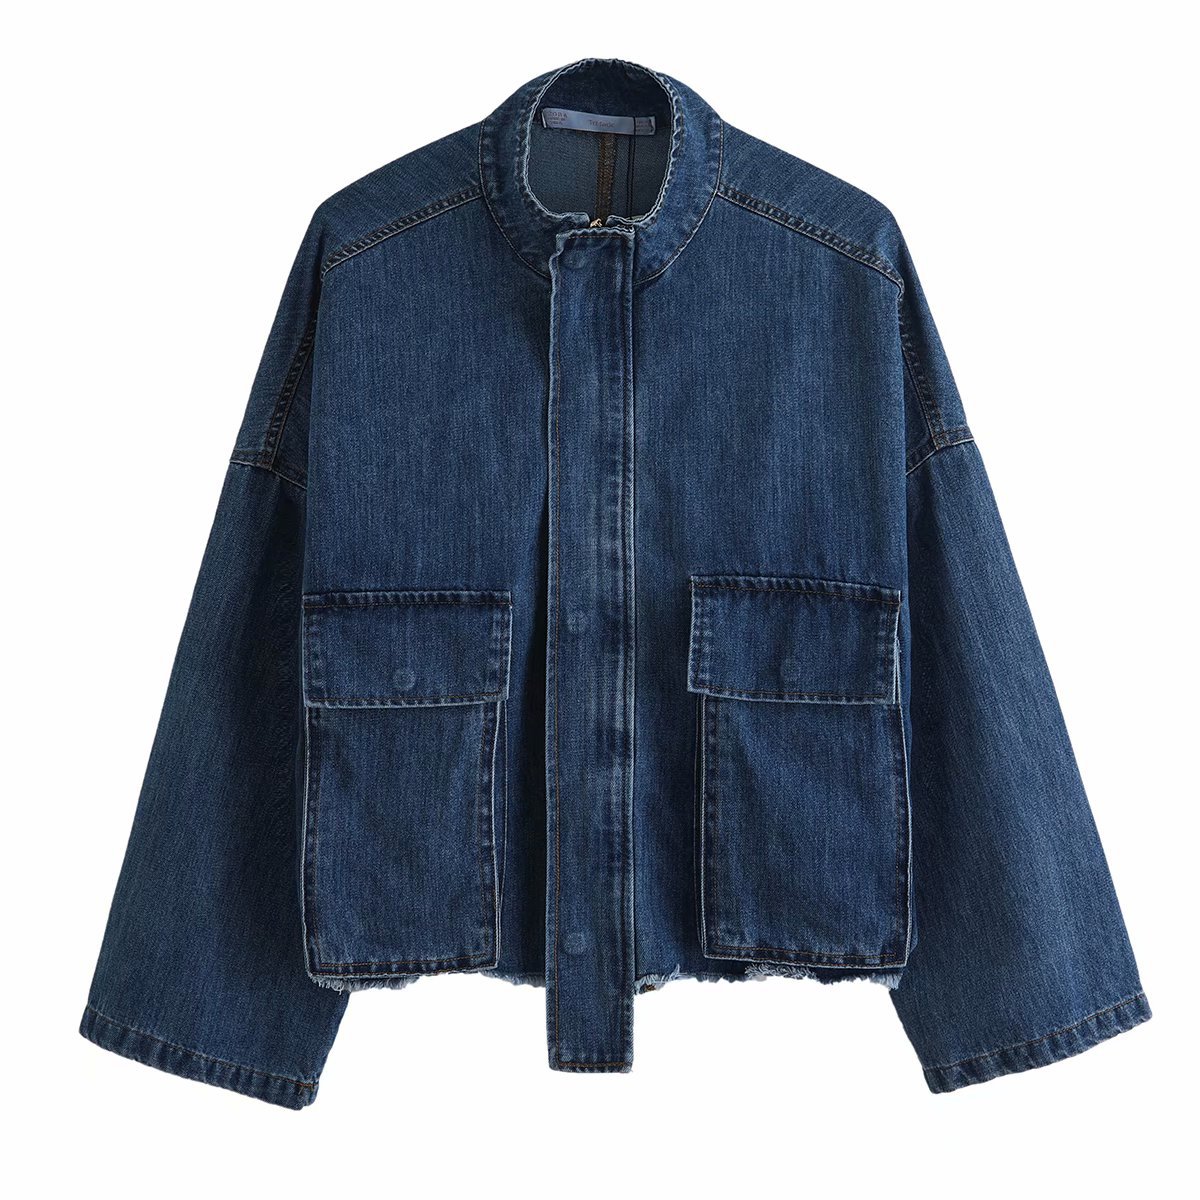 Fall Denim jacket with pocket decoration for women